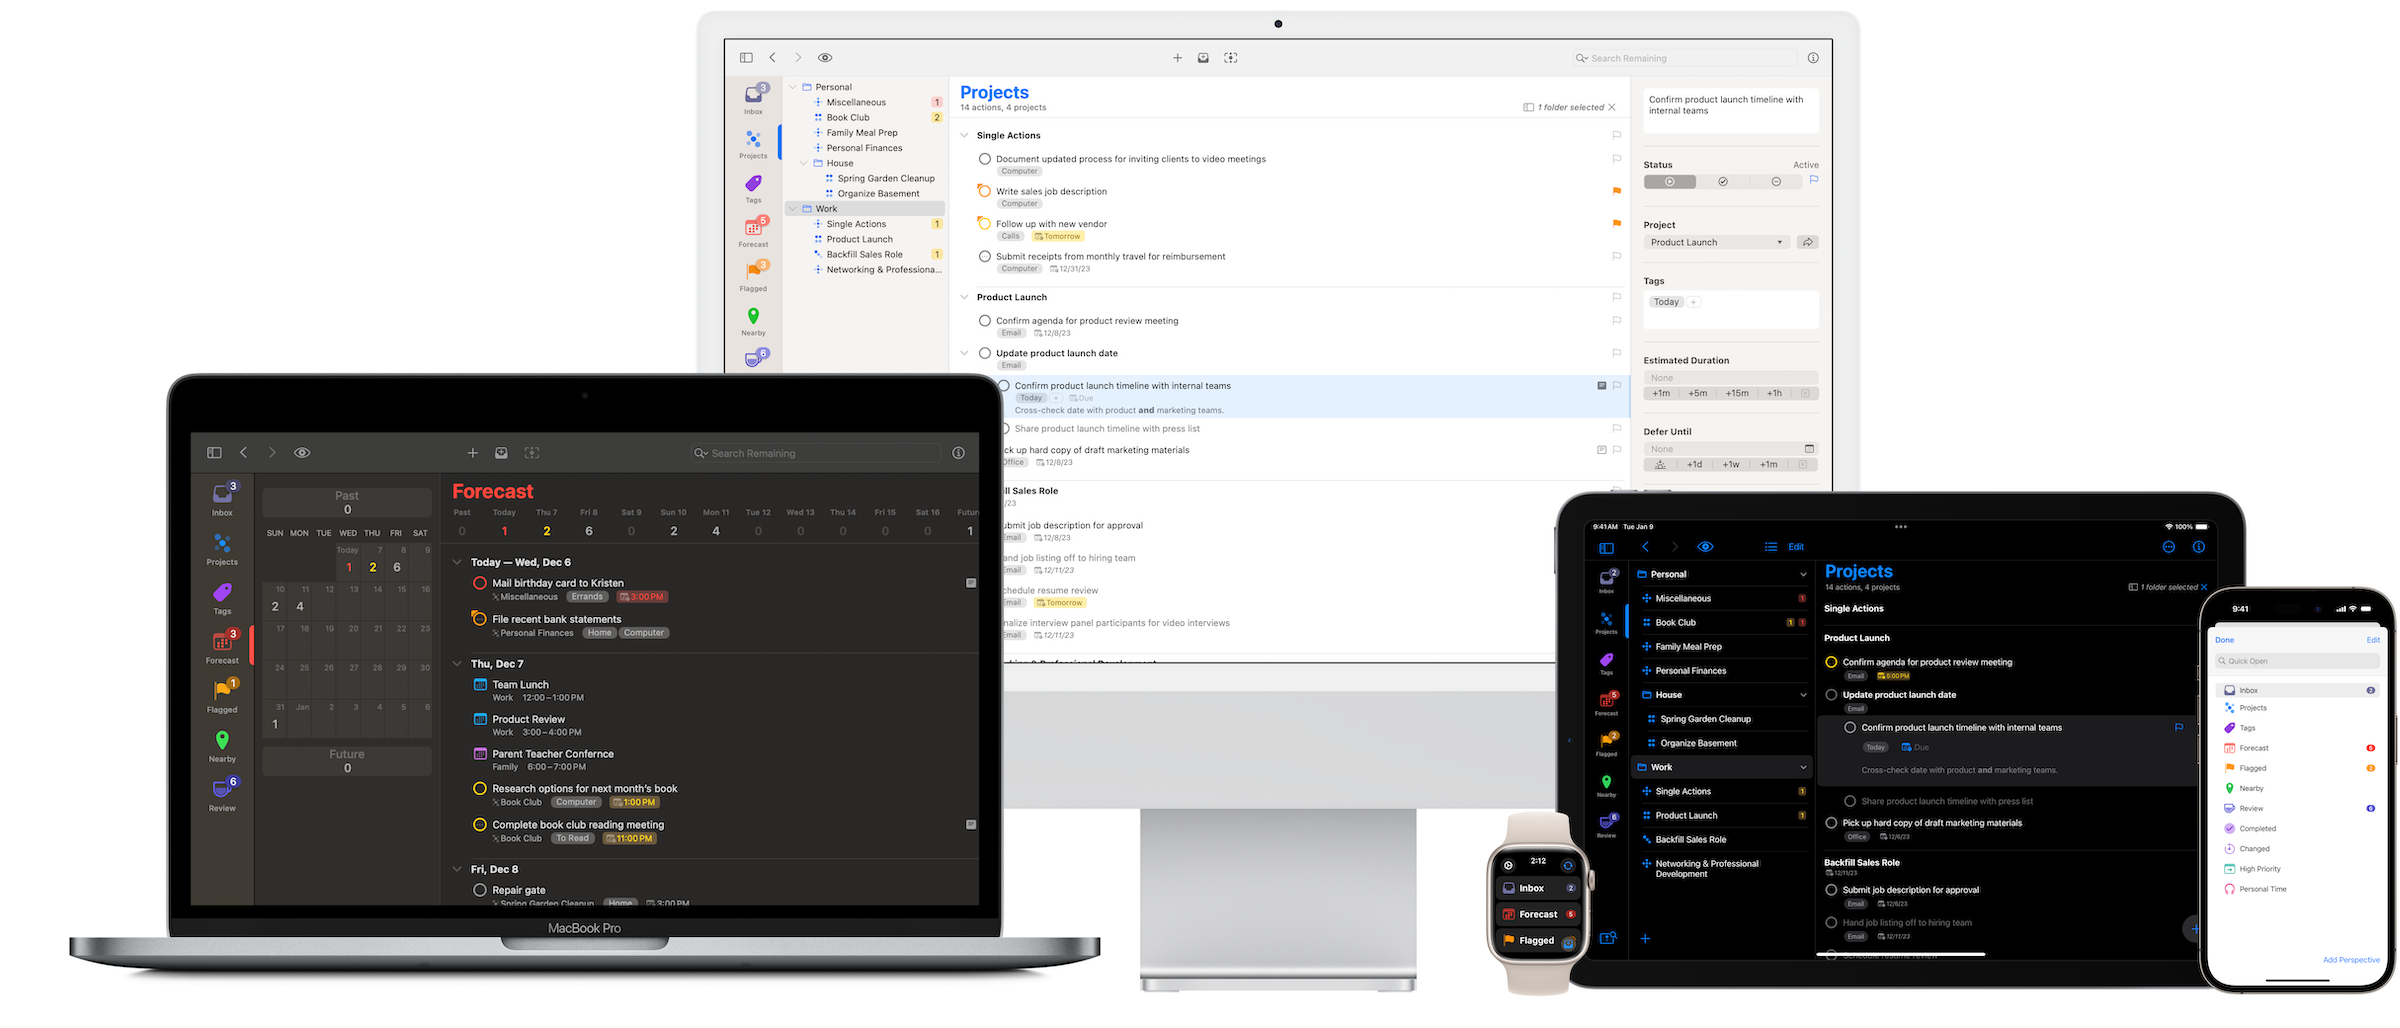 A screenshot showing a composite of OmniFocus 4 compatible devices